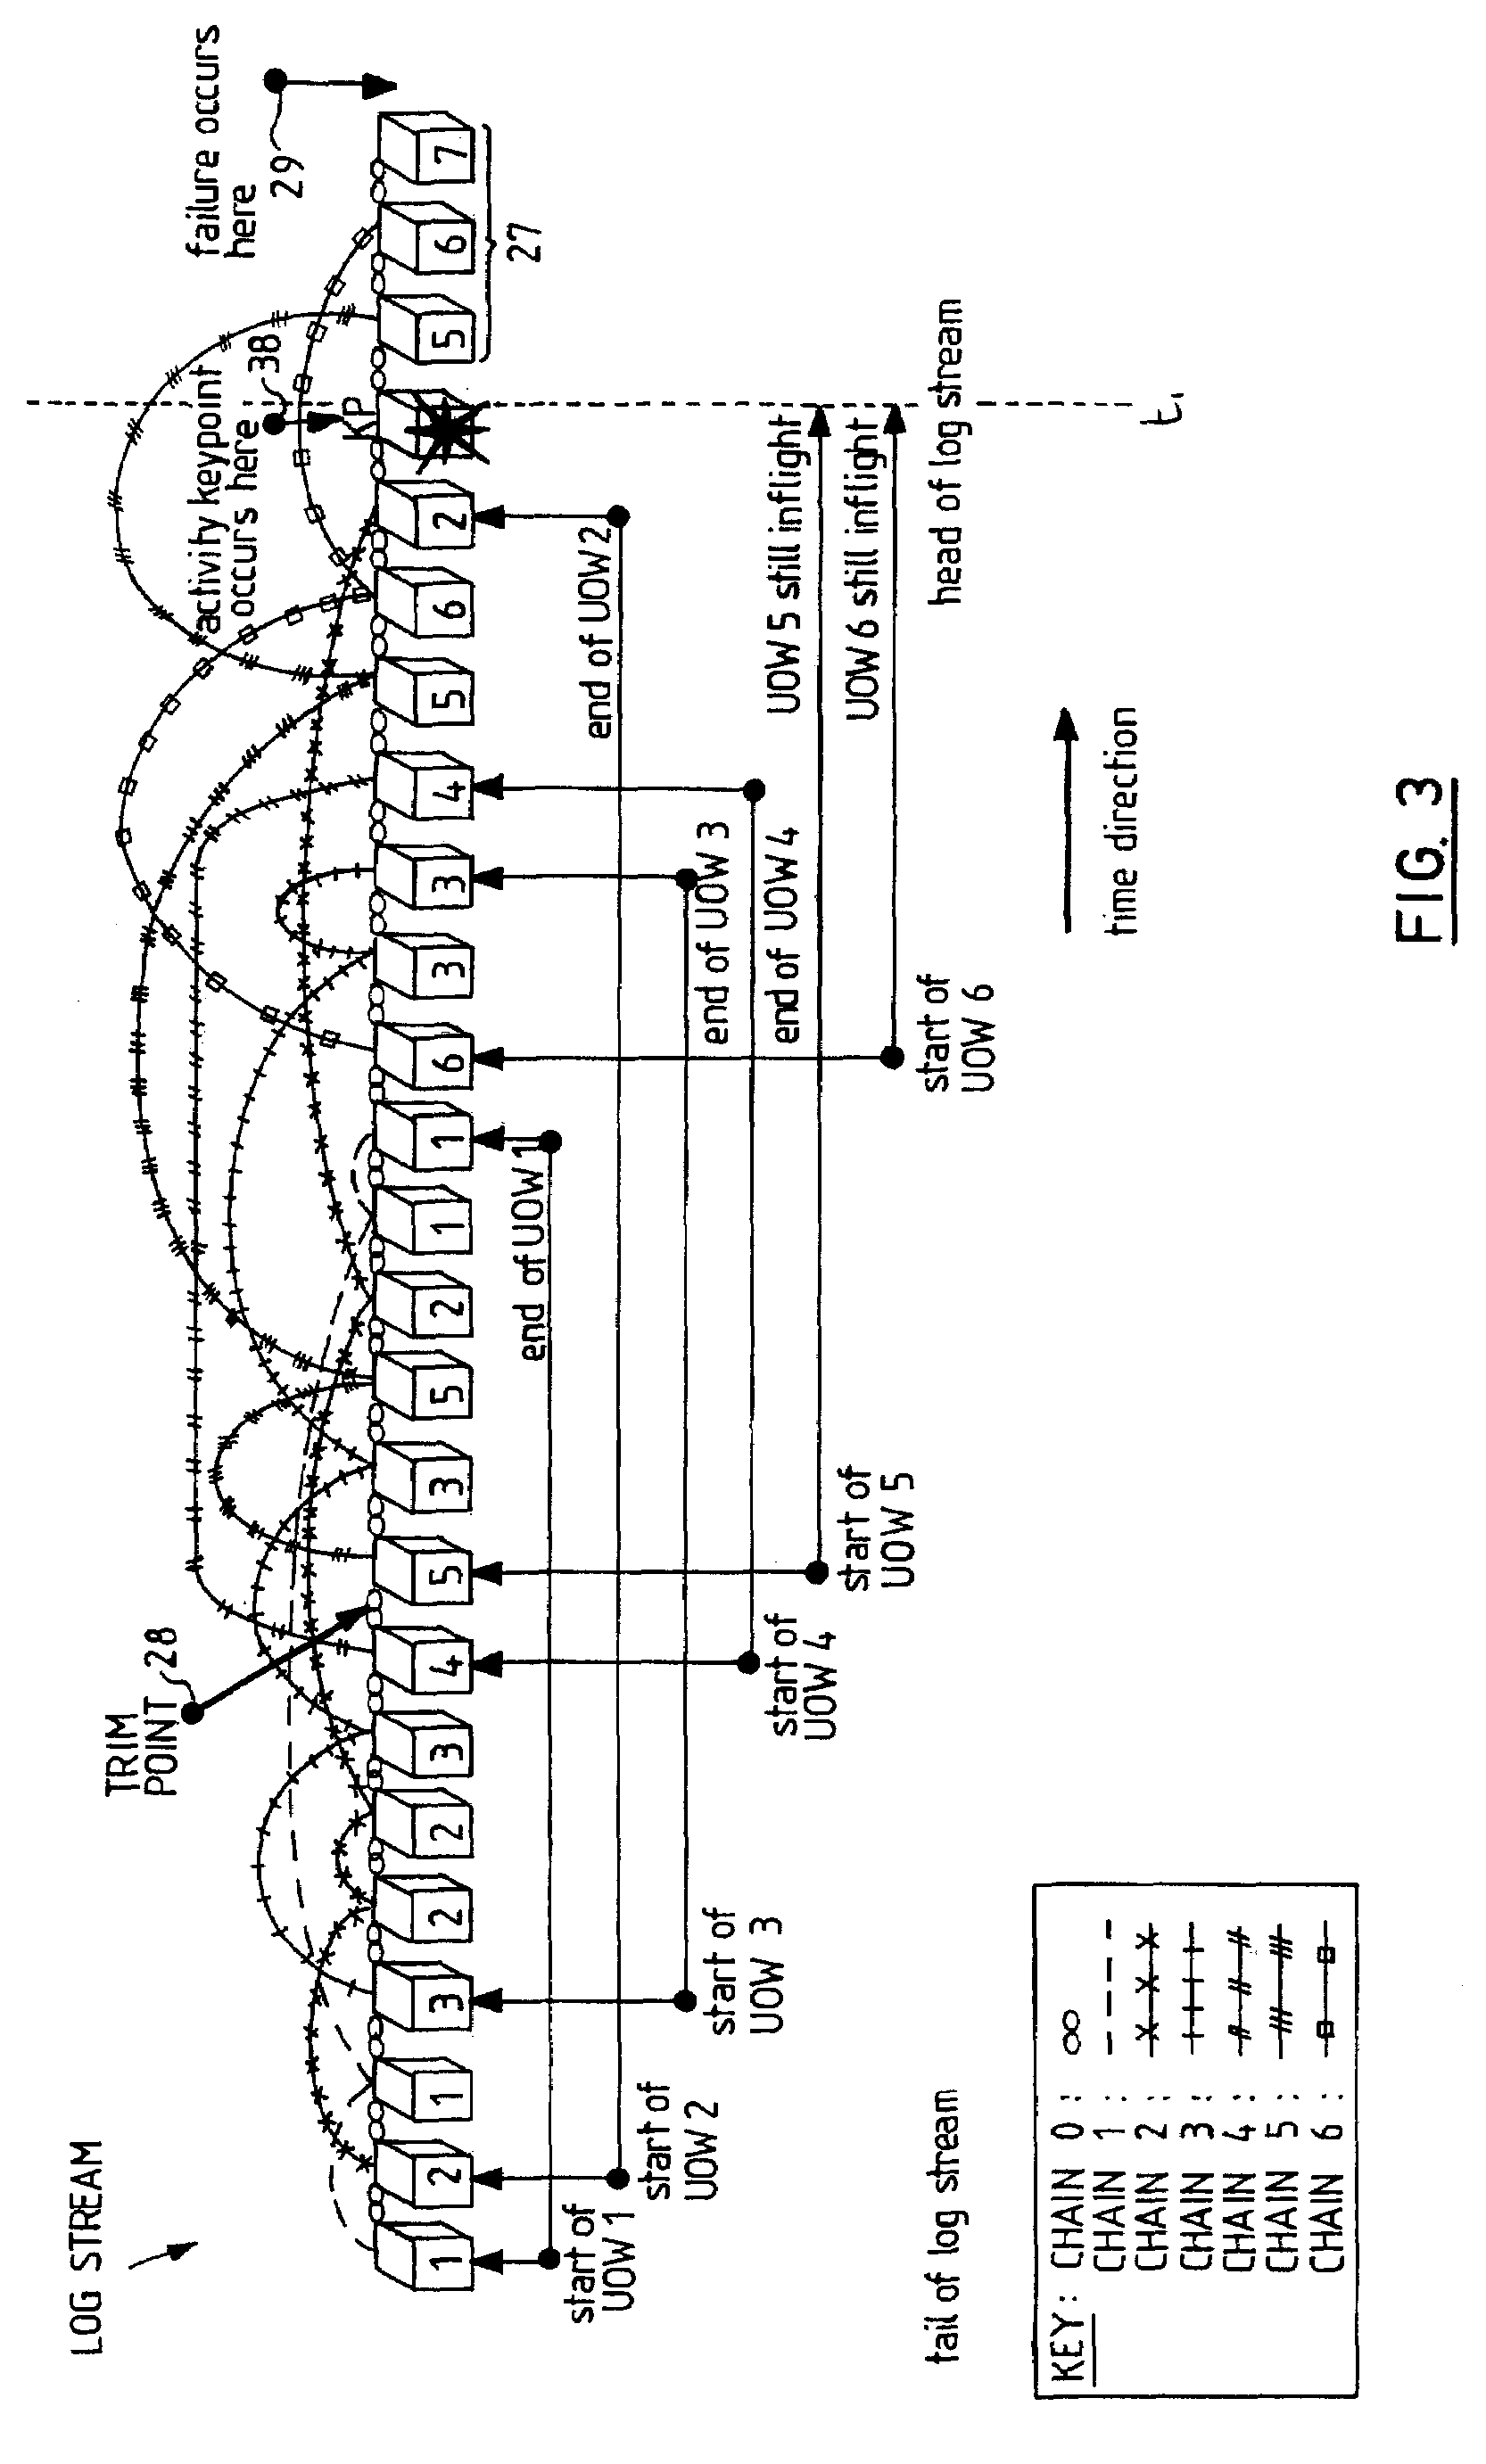 Method and System for Transaction Recovery Time Estimation